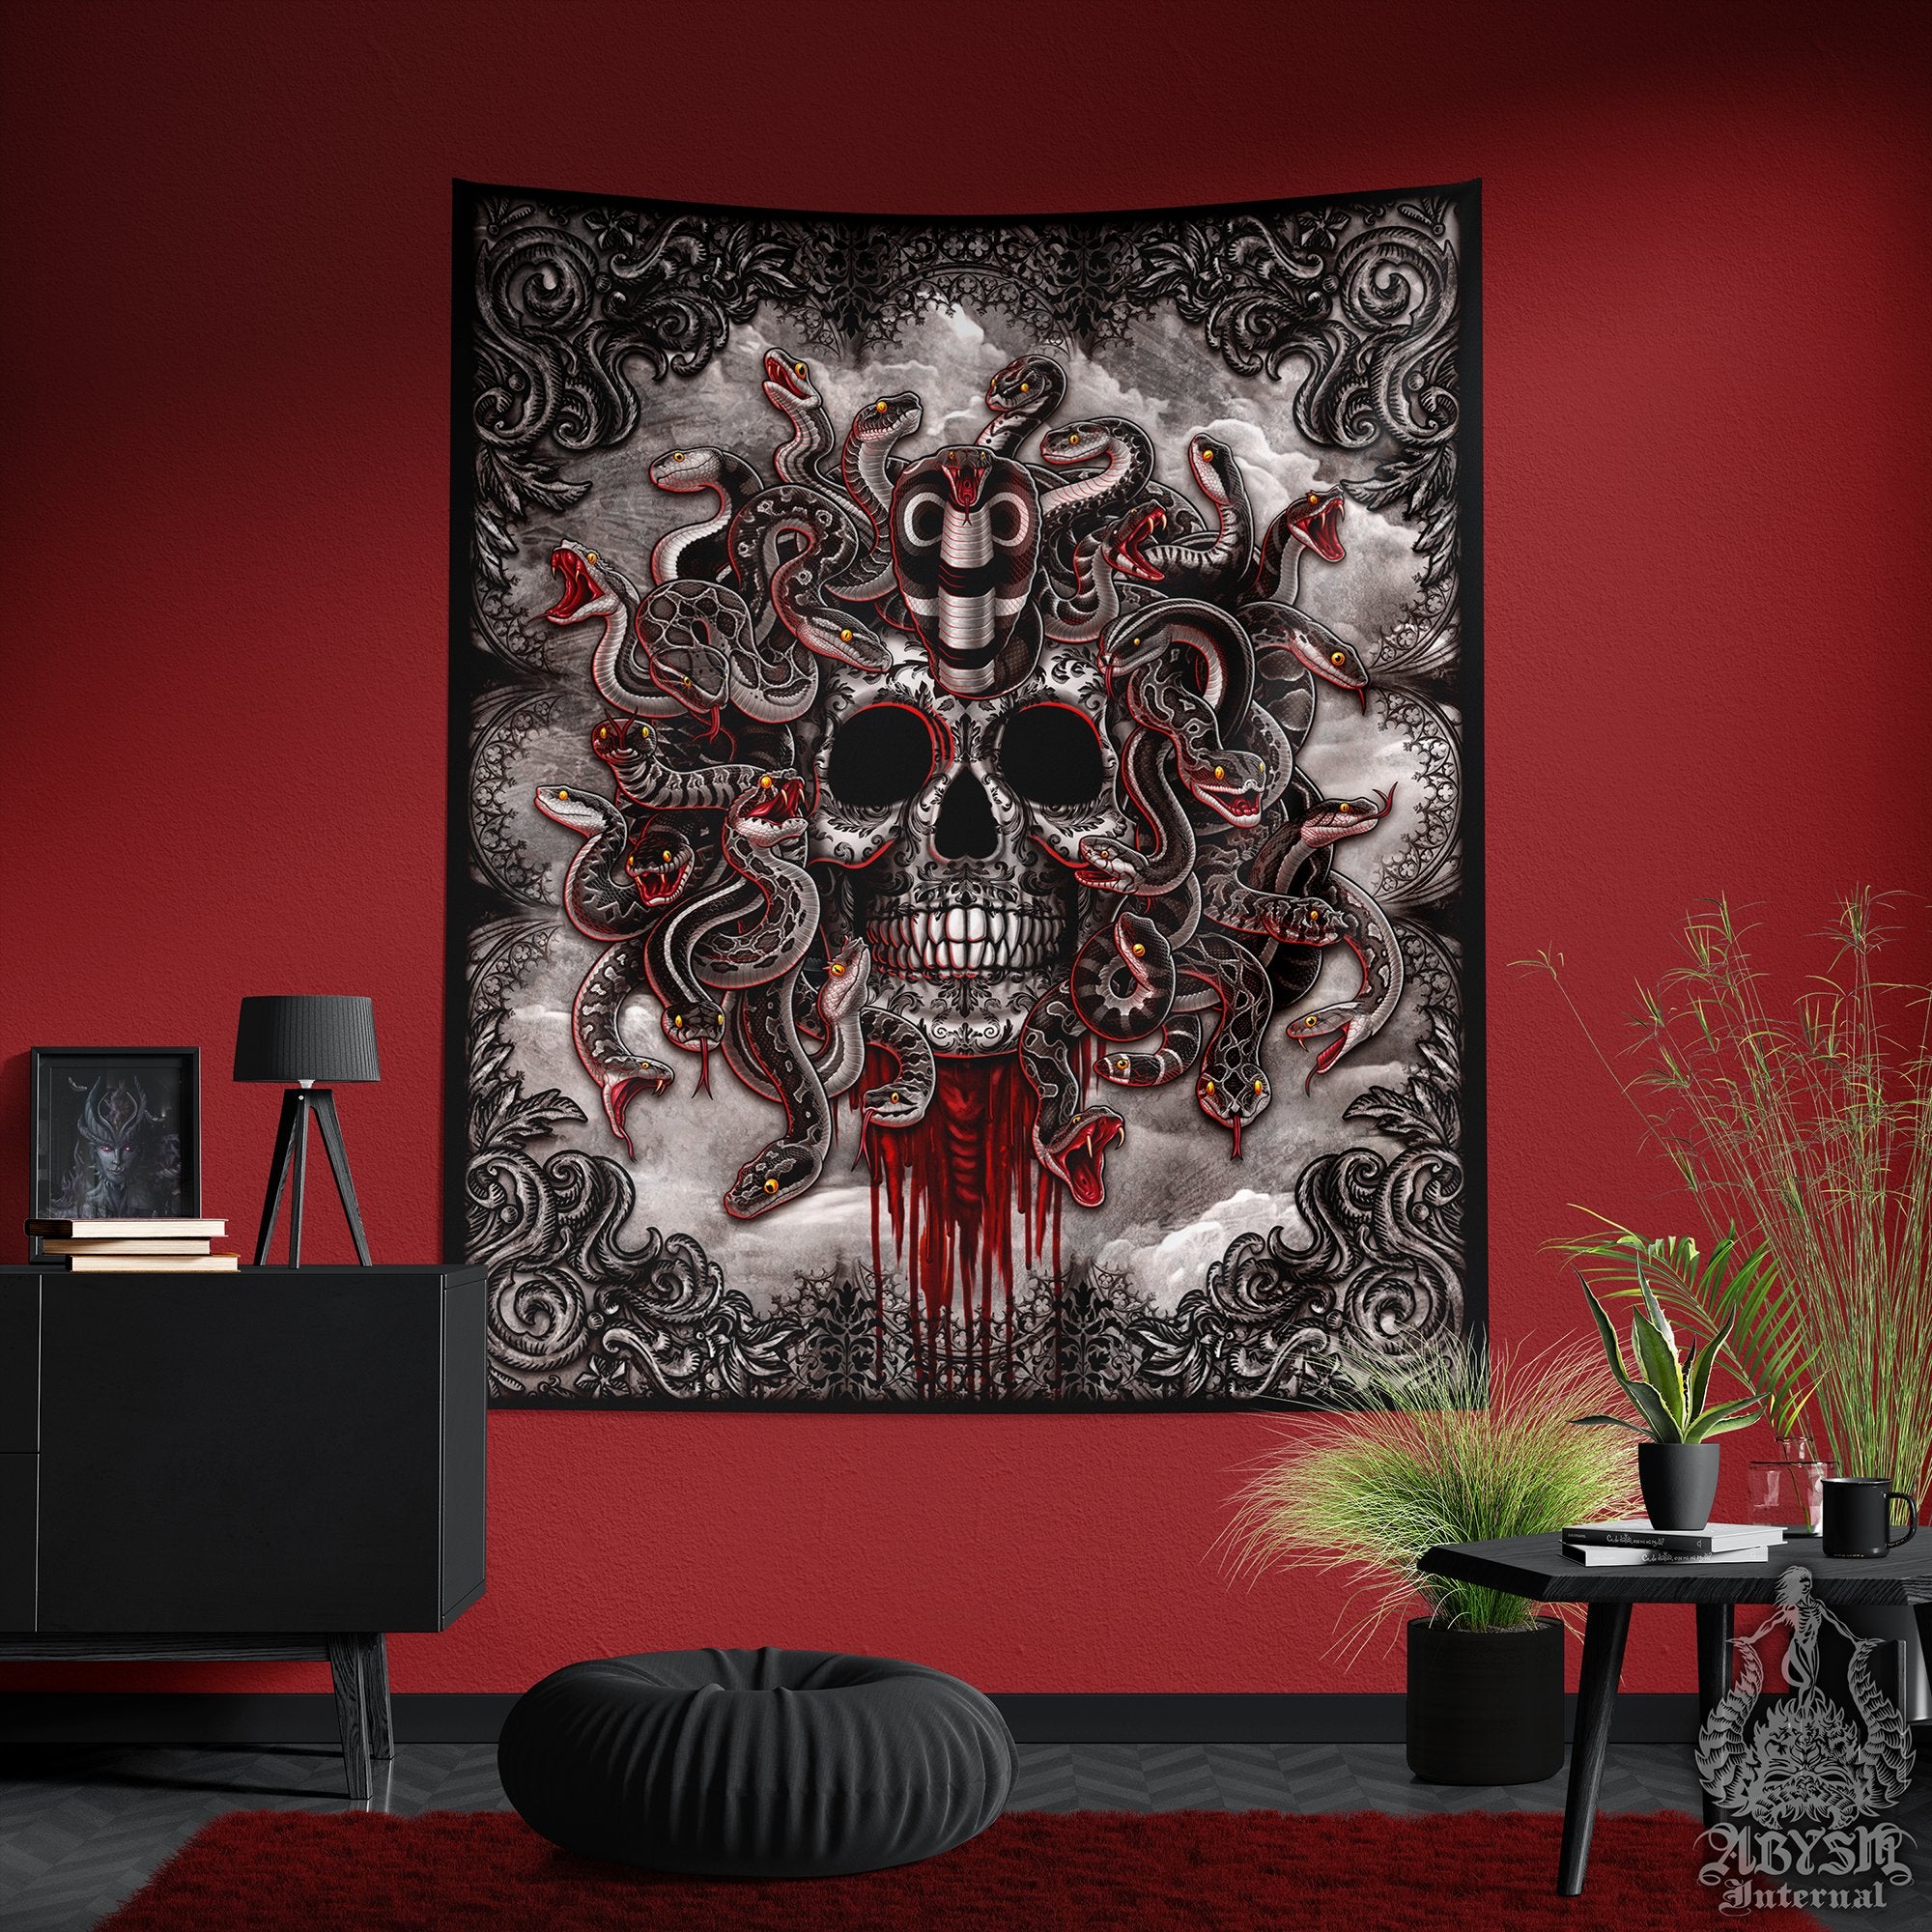 Gothic Tapestry, Medusa Wall Hanging, Goth Skull Home Decor, Vertical Art Print - Horror Grey Snakes, 4 Faces - Abysm Internal